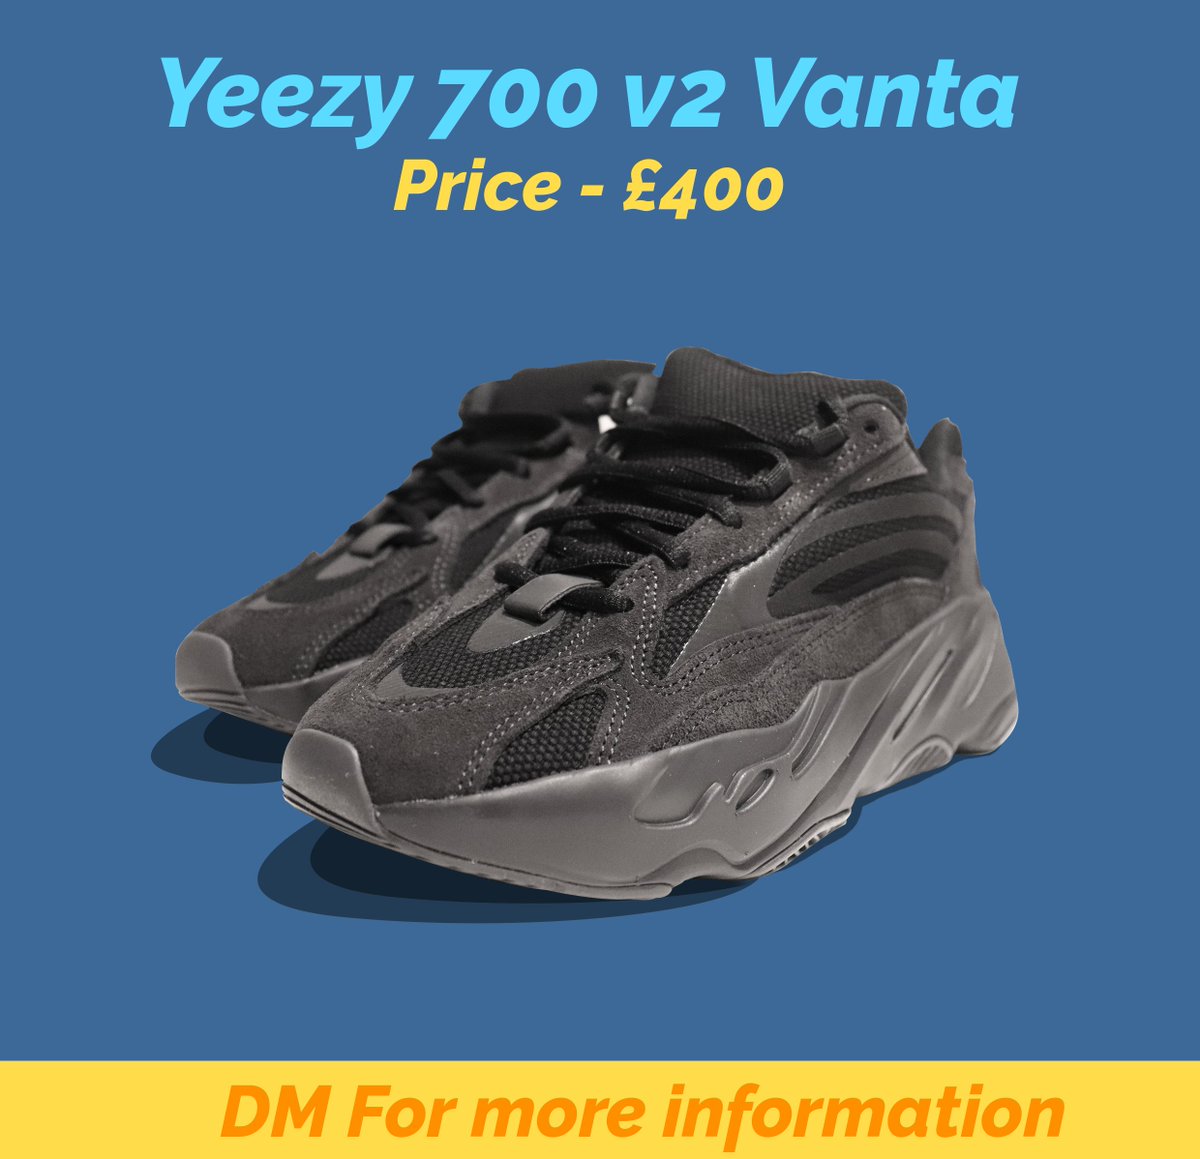 Yeezy 700 V2 Vanta Now Available
Contact us through direct messages for more information.

#streetwear #streetfashion #menswear #yeezy #outfitsociety #supreme #simplefits #mensstyle #snobshots #clothing #highsnobiety #outfitfromabove #outfitgrid #outfitoftheday #menstyle